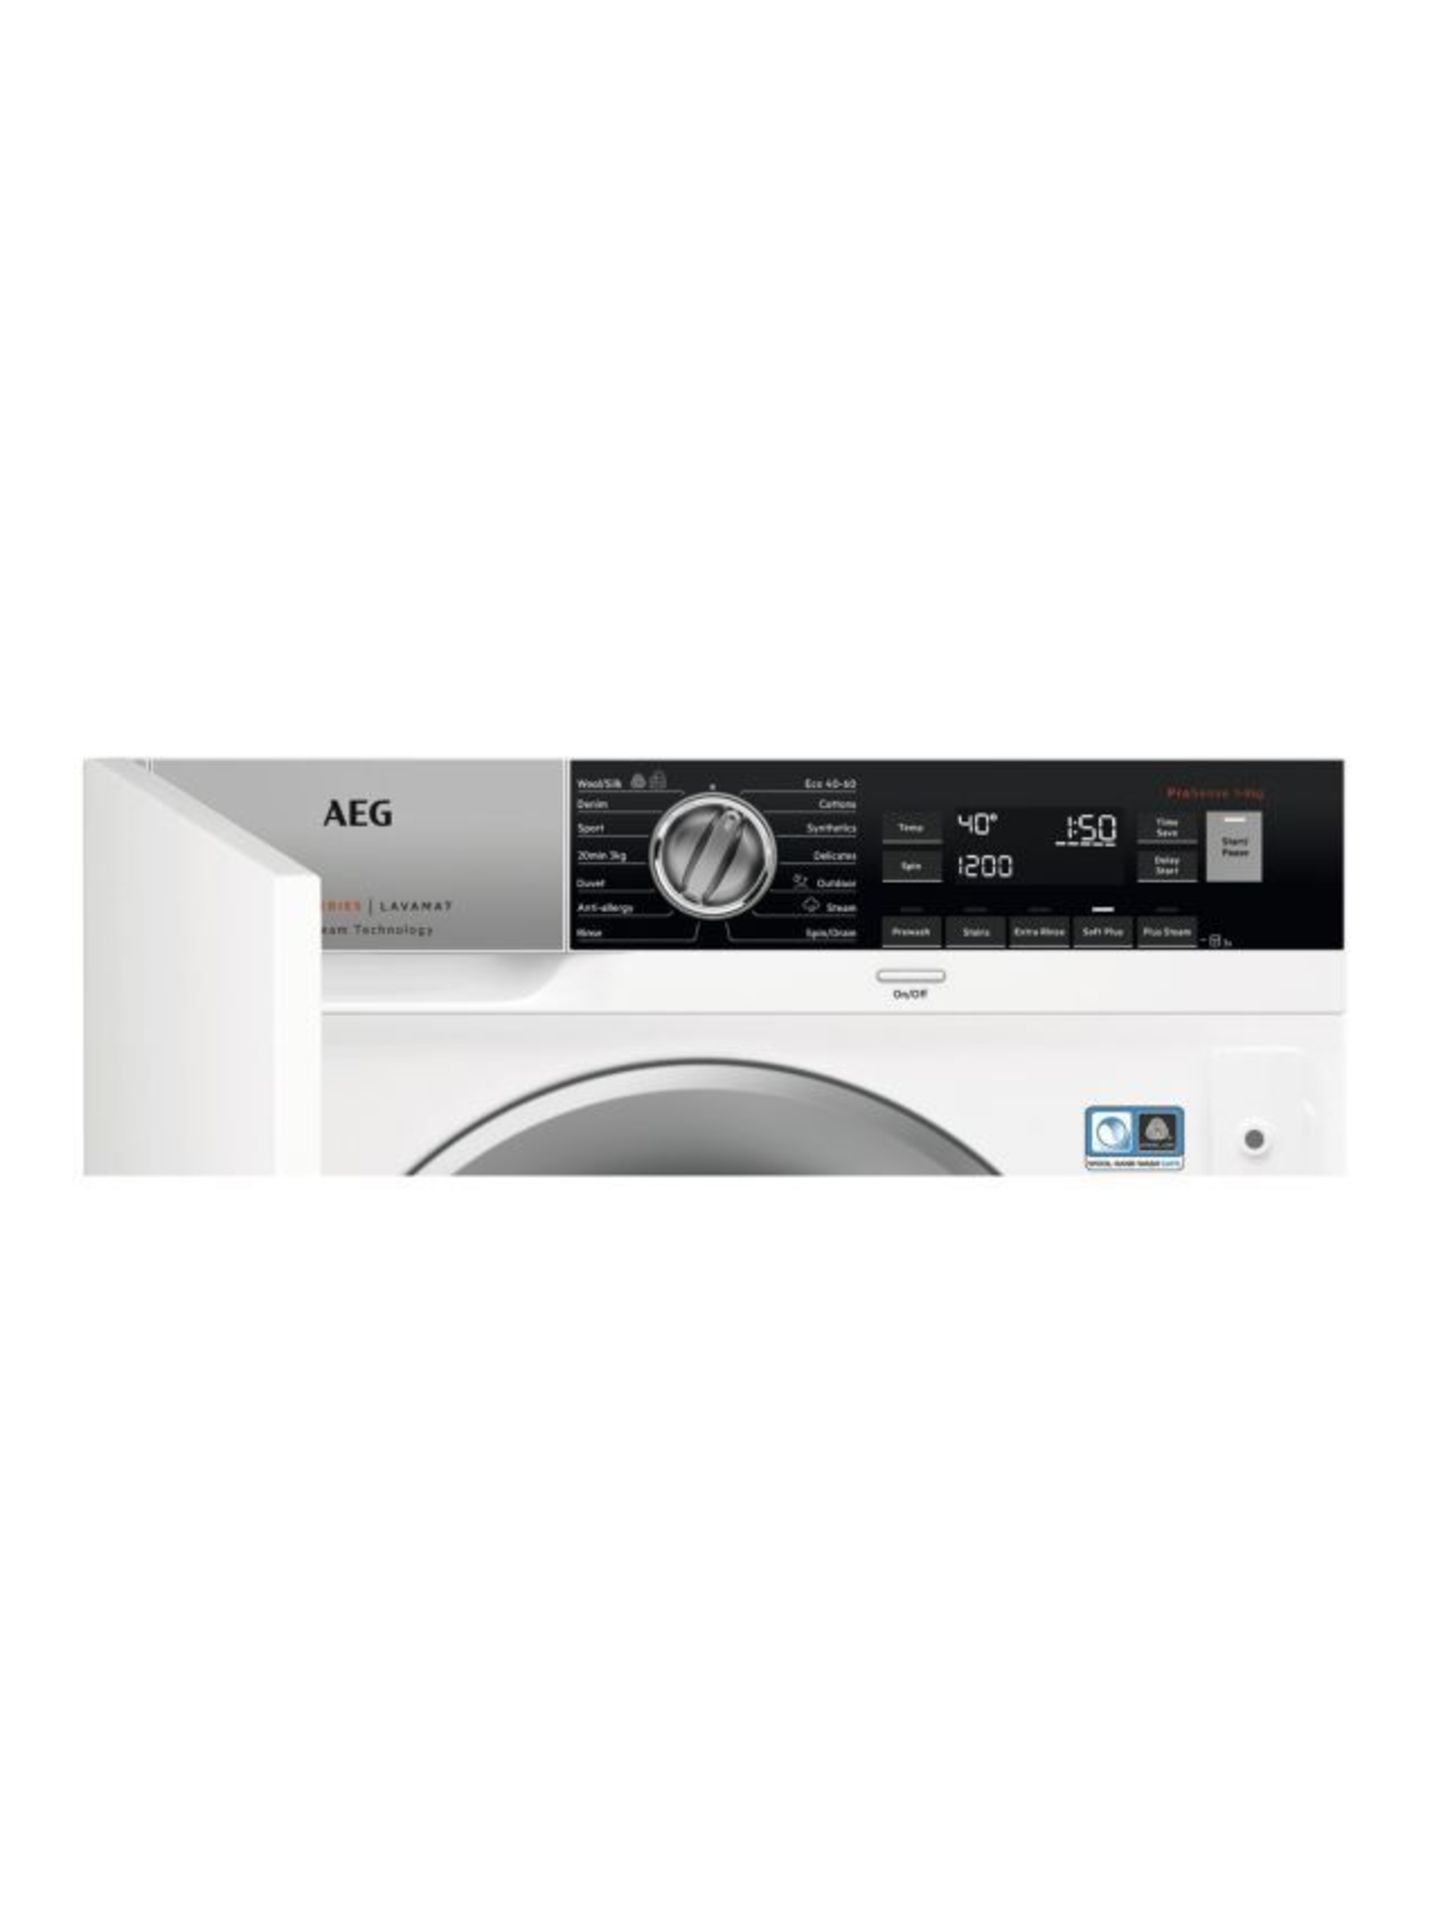 AEG 7000 L7FC8432BI Integrated Washing Machine, 8kg Load, 1400rpm Spin, White. - H/S. RRP £999.00. - Image 5 of 6